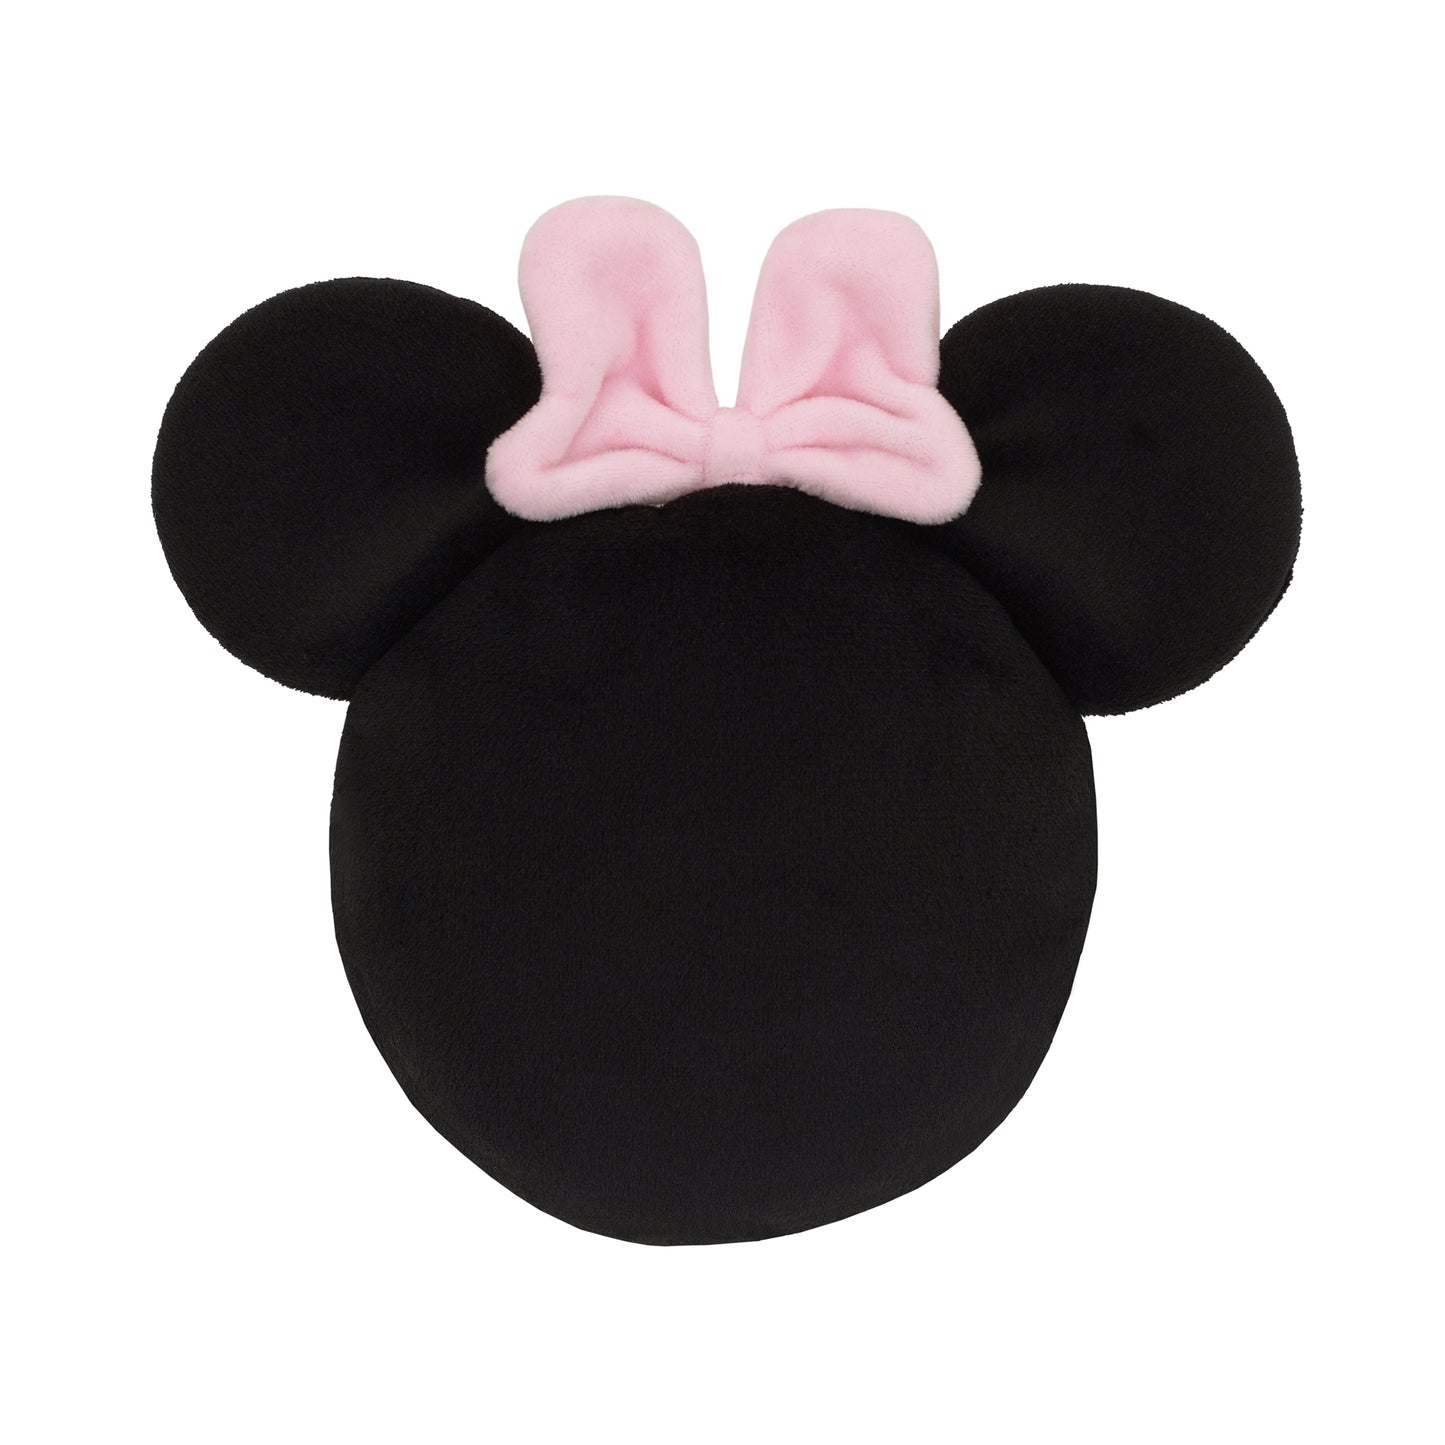 Disney Minnie Mouse Shaped Black Plush with Pink Bow 3 Piece Wall Décor